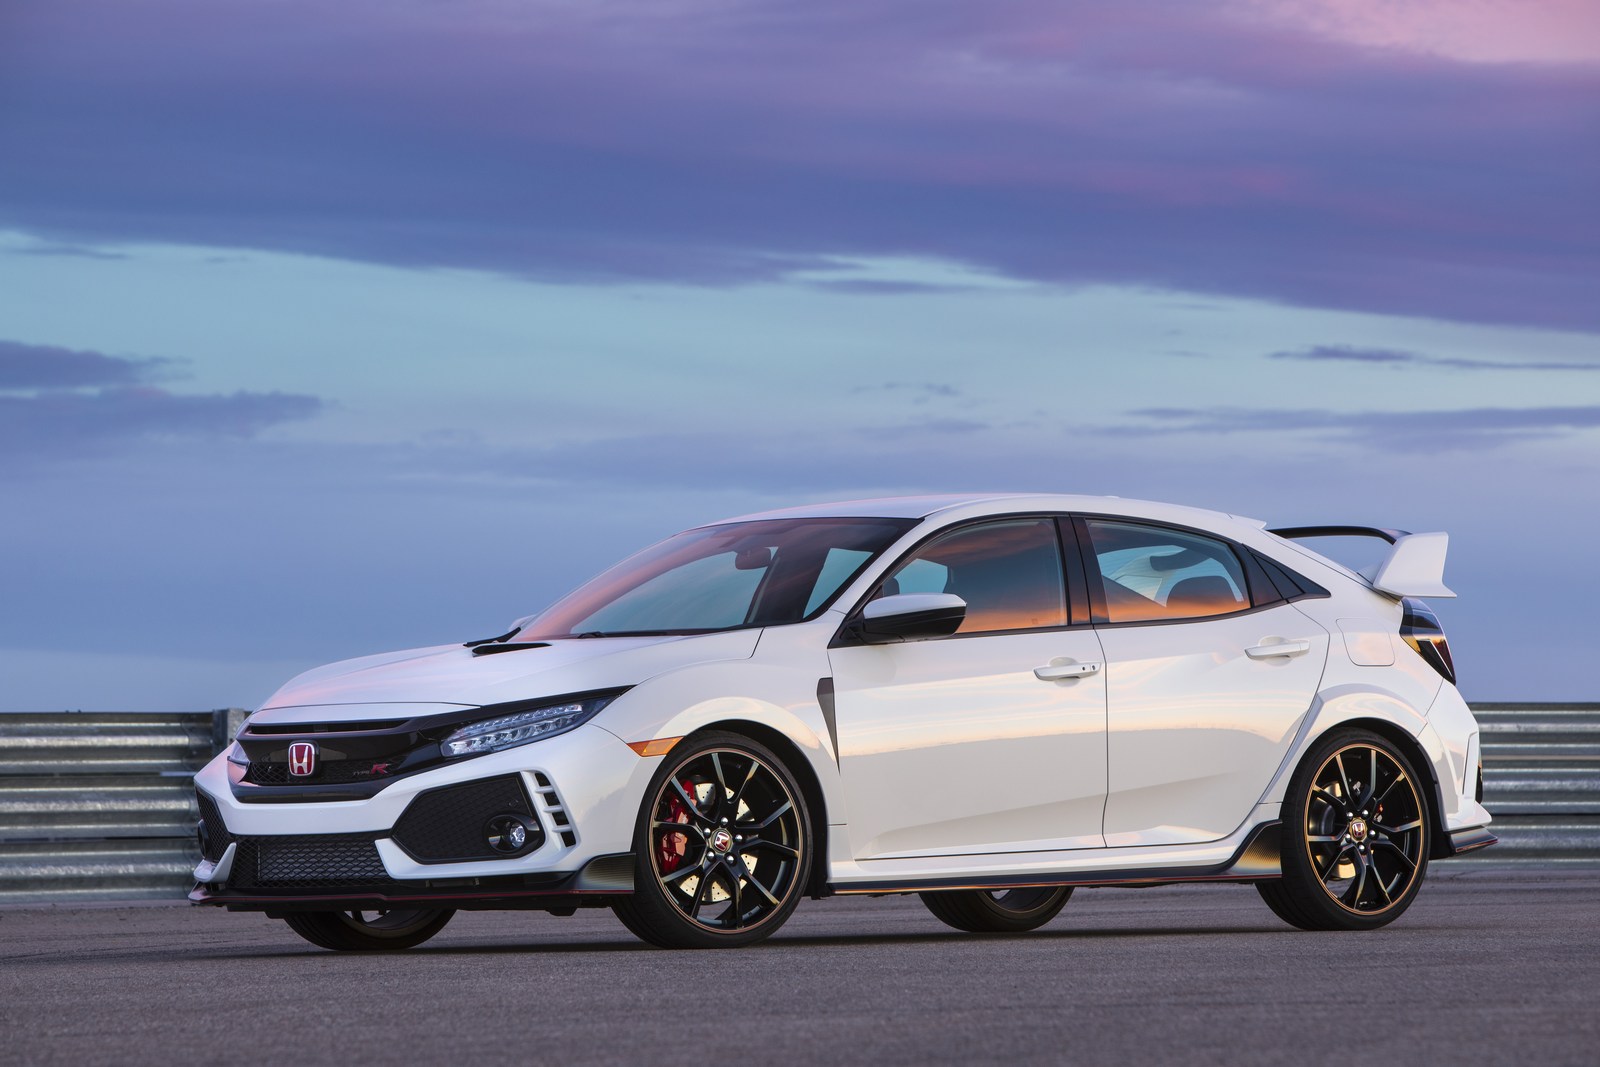 2018 Honda Civic Type R Price Bumped To $34,100, No Entry Level | Carscoops